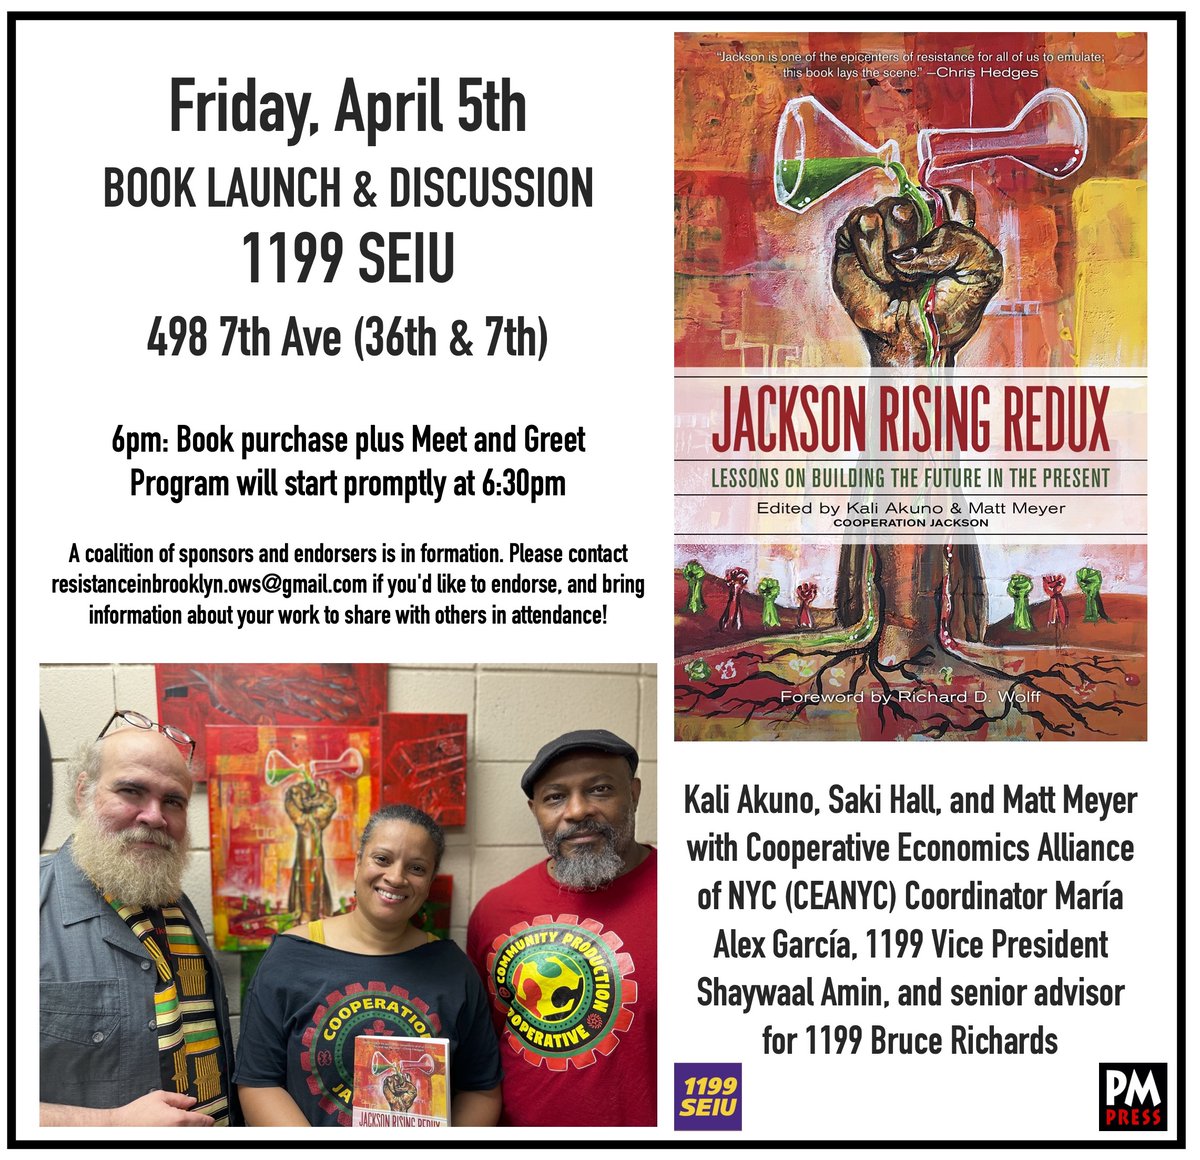 Tonight in NYC! Book Launch and Discussion of Jackson Rising Redux: Lessons on Building the Future in the Present Featuring coeditors and contributors Kali Akuno and Saki Hall, and Matt Meyer with Maria Alex Garcia, Shaywaal Amin, and Bruce Richards.